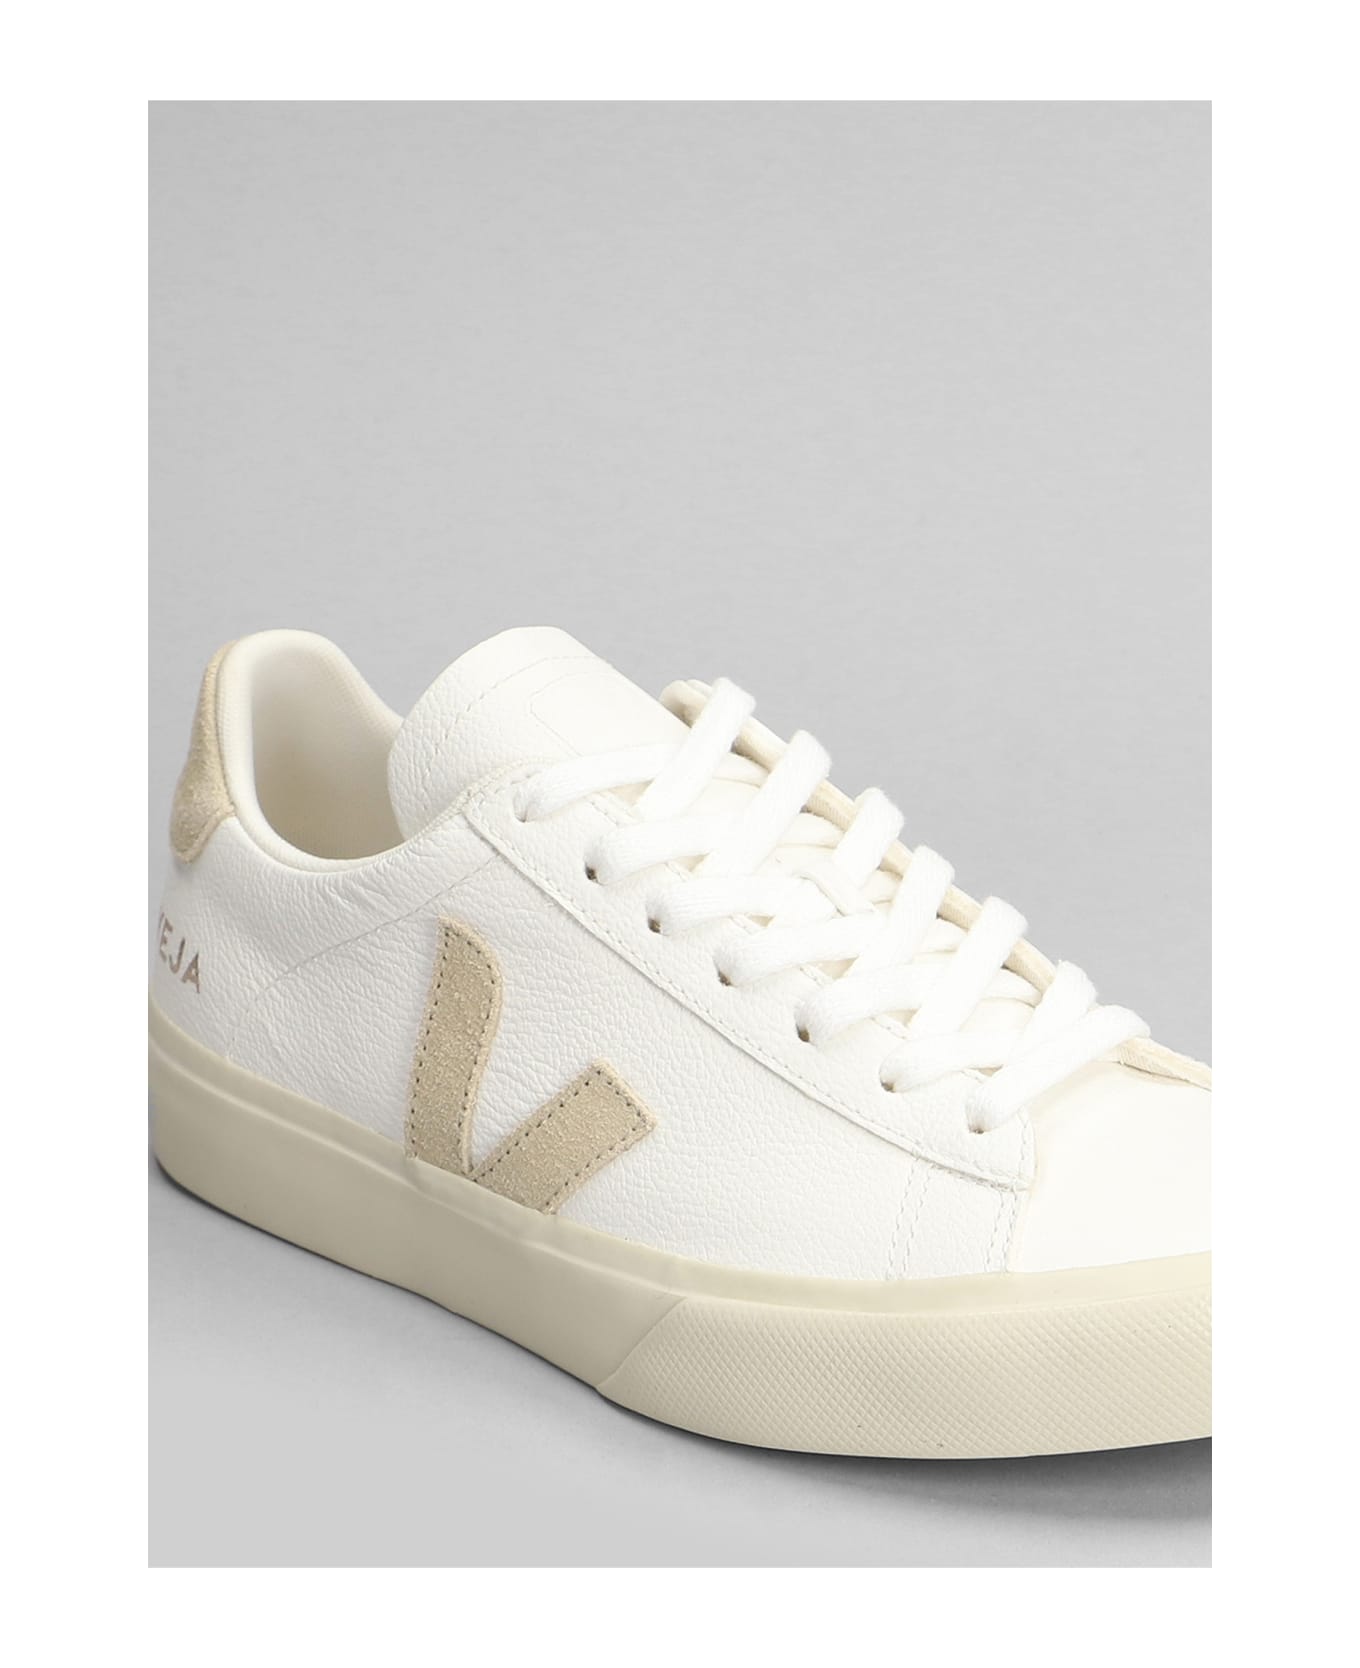 Veja Campo Sneakers In White Leather - white スニーカー